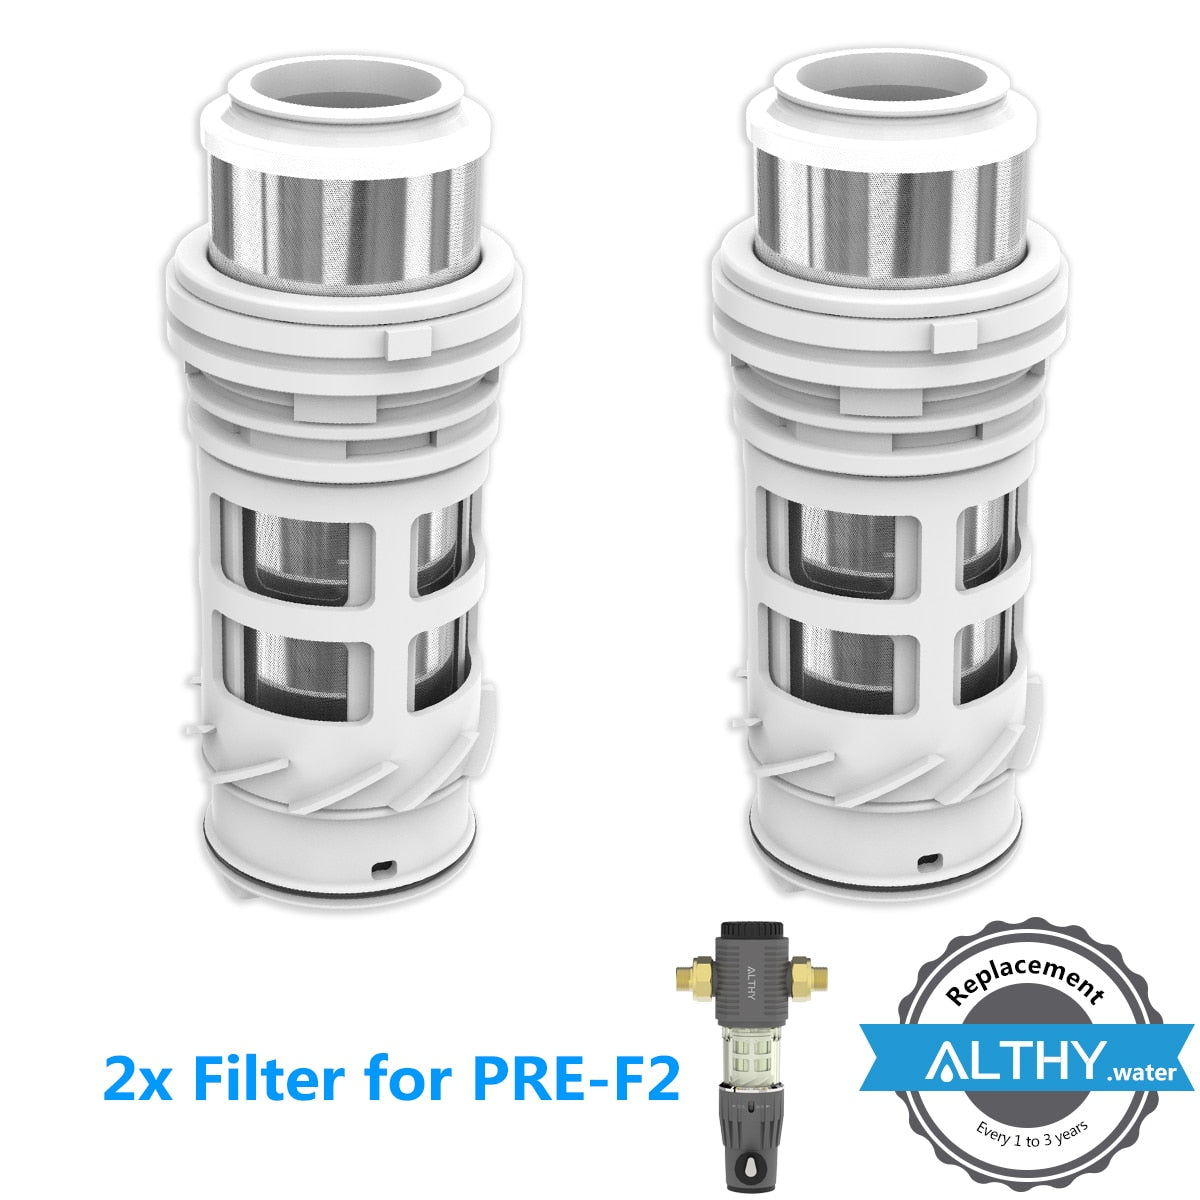 Backwash Water Filter Replacement For ALTHY PRE1 / PRE2 / PRE3 / PRE4 / AUTO2 Central Prefilter System Stainless Steel Mesh  Hardware > Plumbing > Water Dispensing & Filtration 95.99 EZYSELLA SHOP